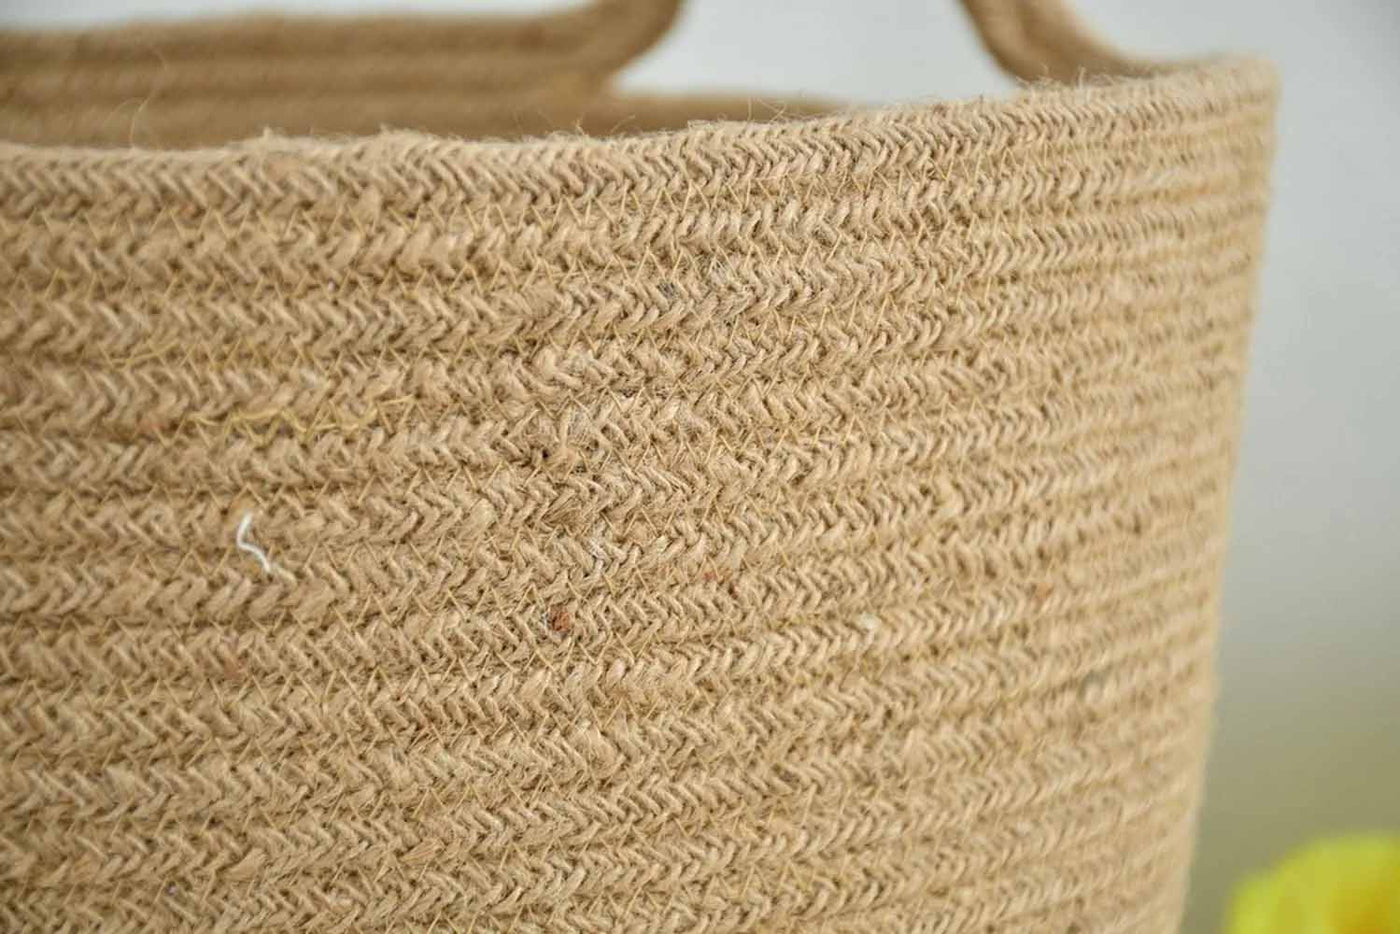 Cotton Conical Basket with Handle - Storage & Utilities - 6